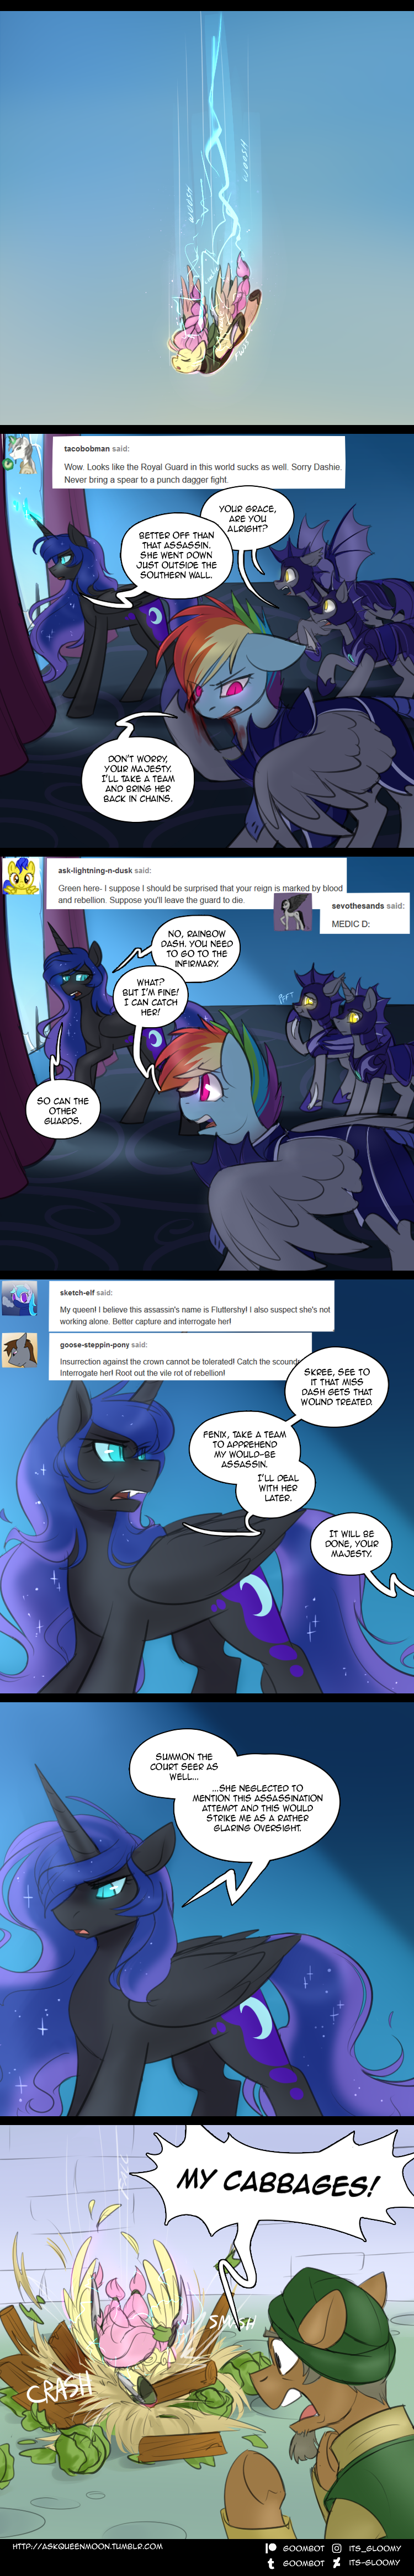 Page 9 - Part 4